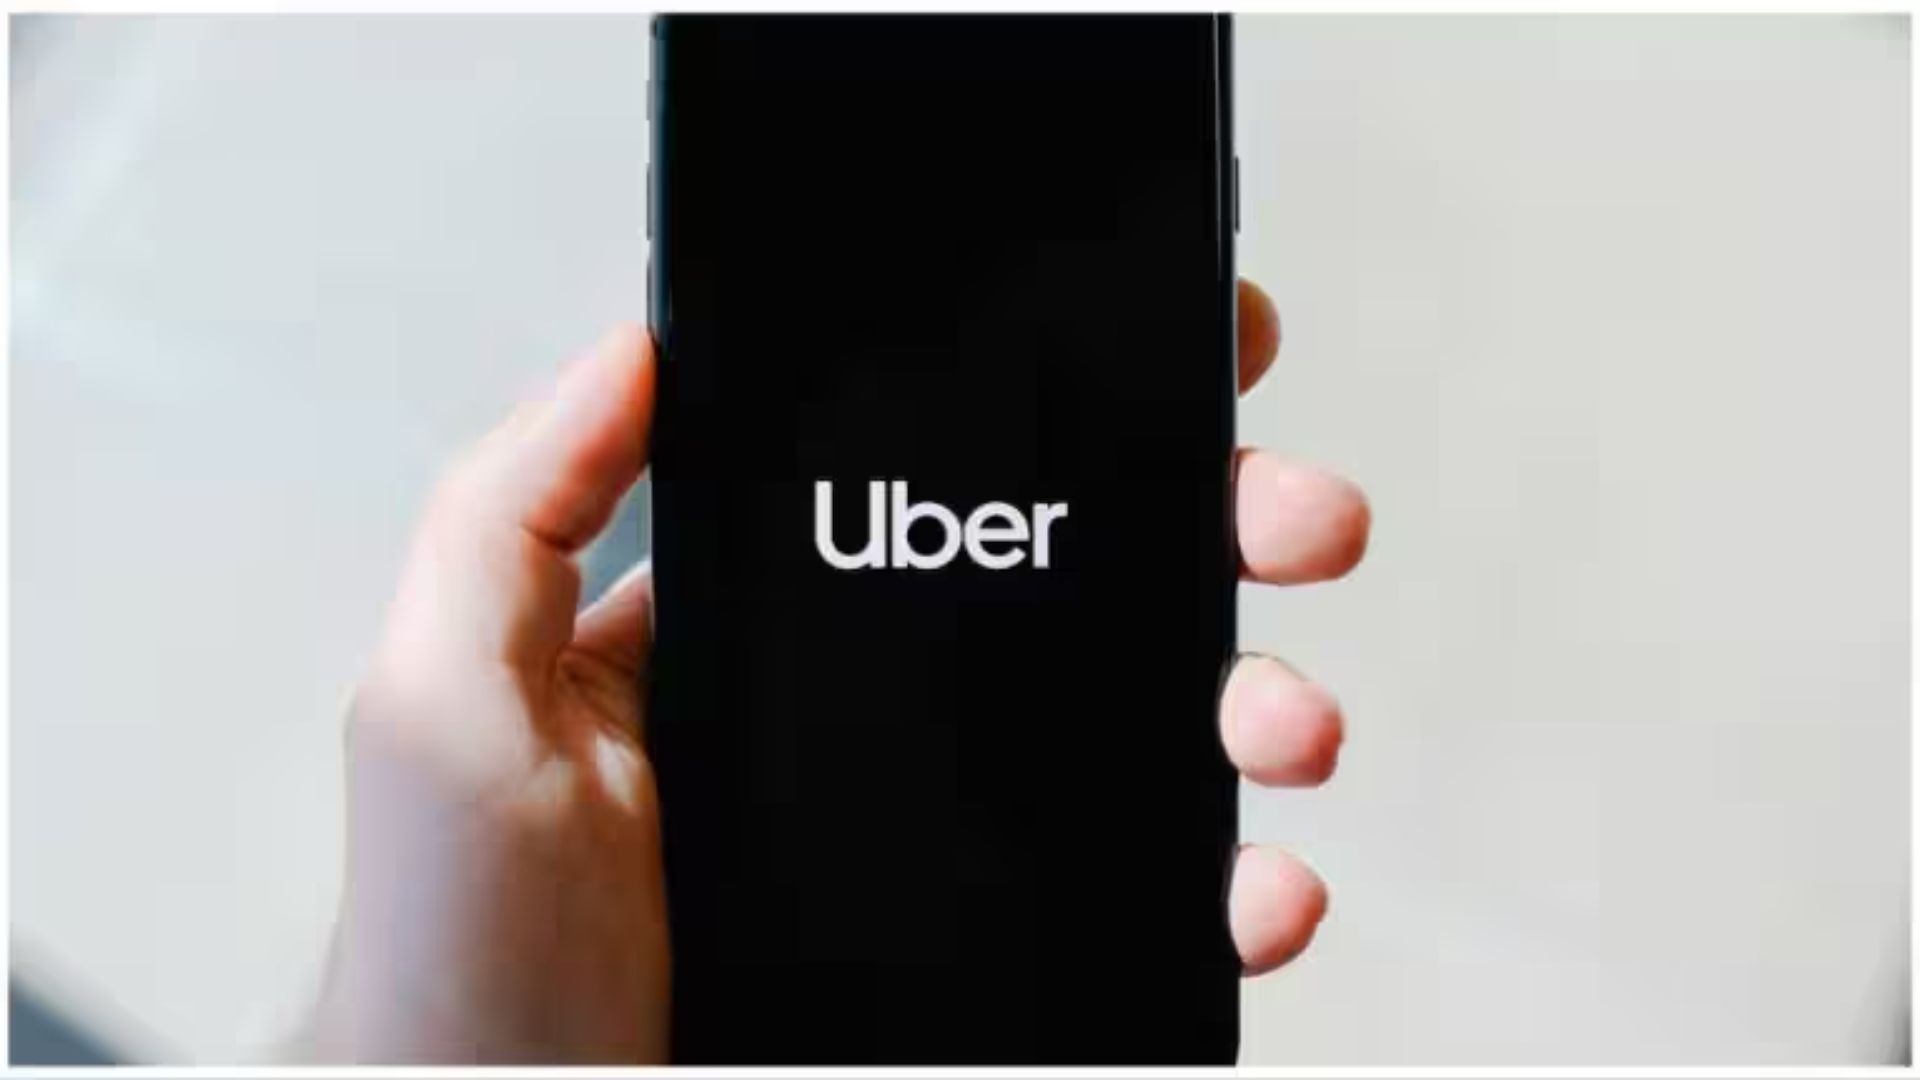 Bengaluru Woman Spends Over Rs. 16,000 Monthly On Uber, More Than Half Her Rent